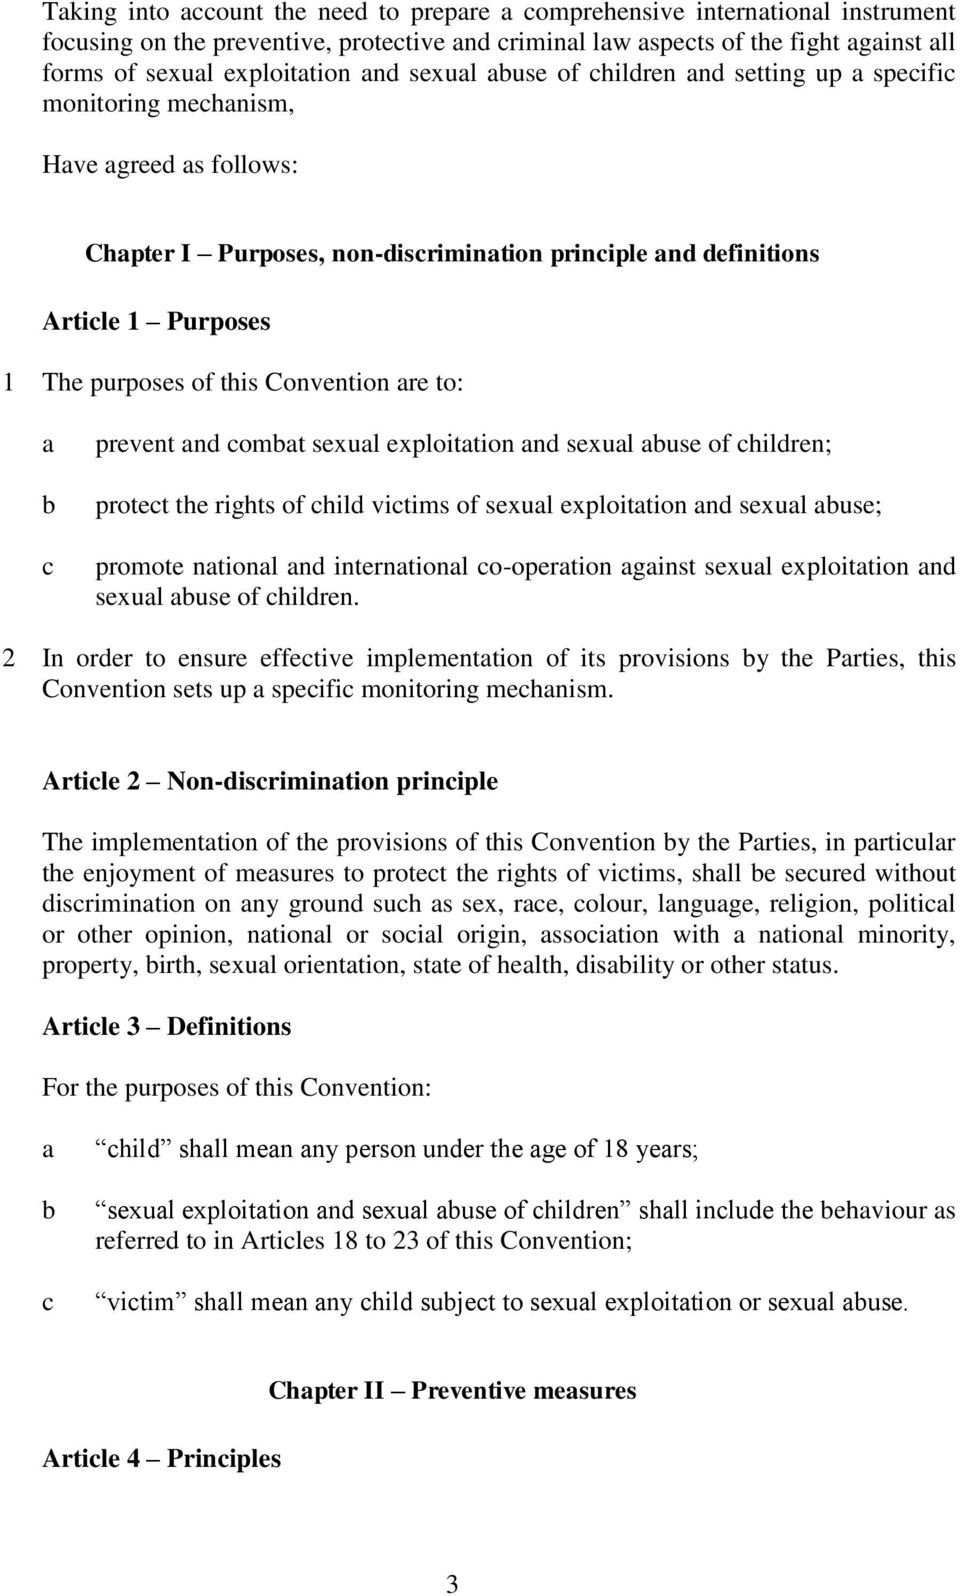 of this Convention are to: a b c prevent and combat sexual exploitation and sexual abuse of children; protect the rights of child victims of sexual exploitation and sexual abuse; promote national and